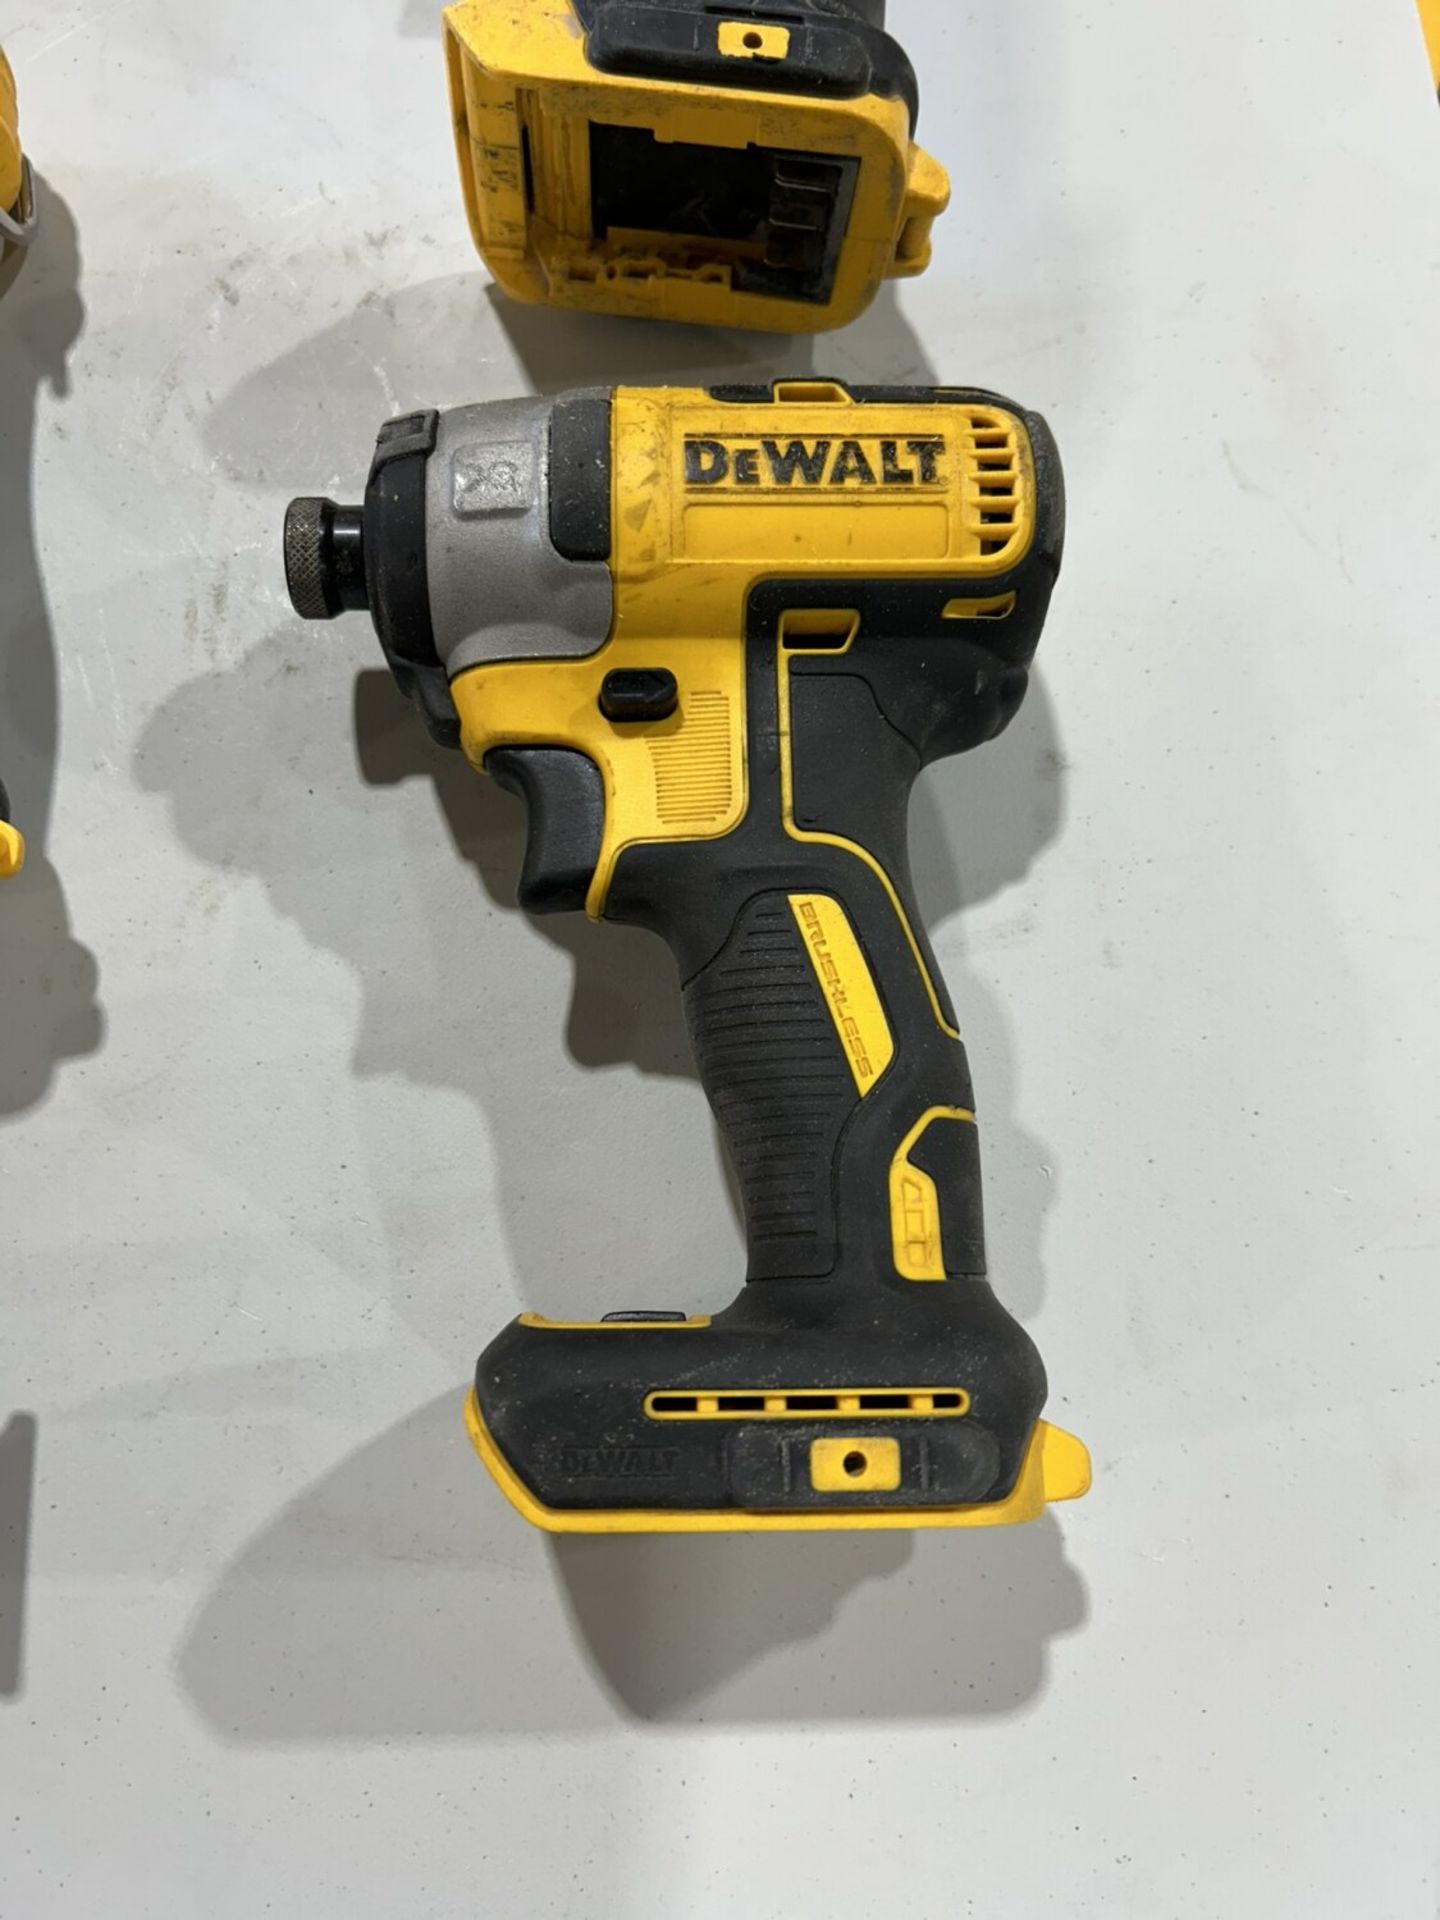 DEWALT CORDLESS IMPACT DRIVER, DRILL, & LIGHT W/ BATTERY AND CHARGER - Image 3 of 11